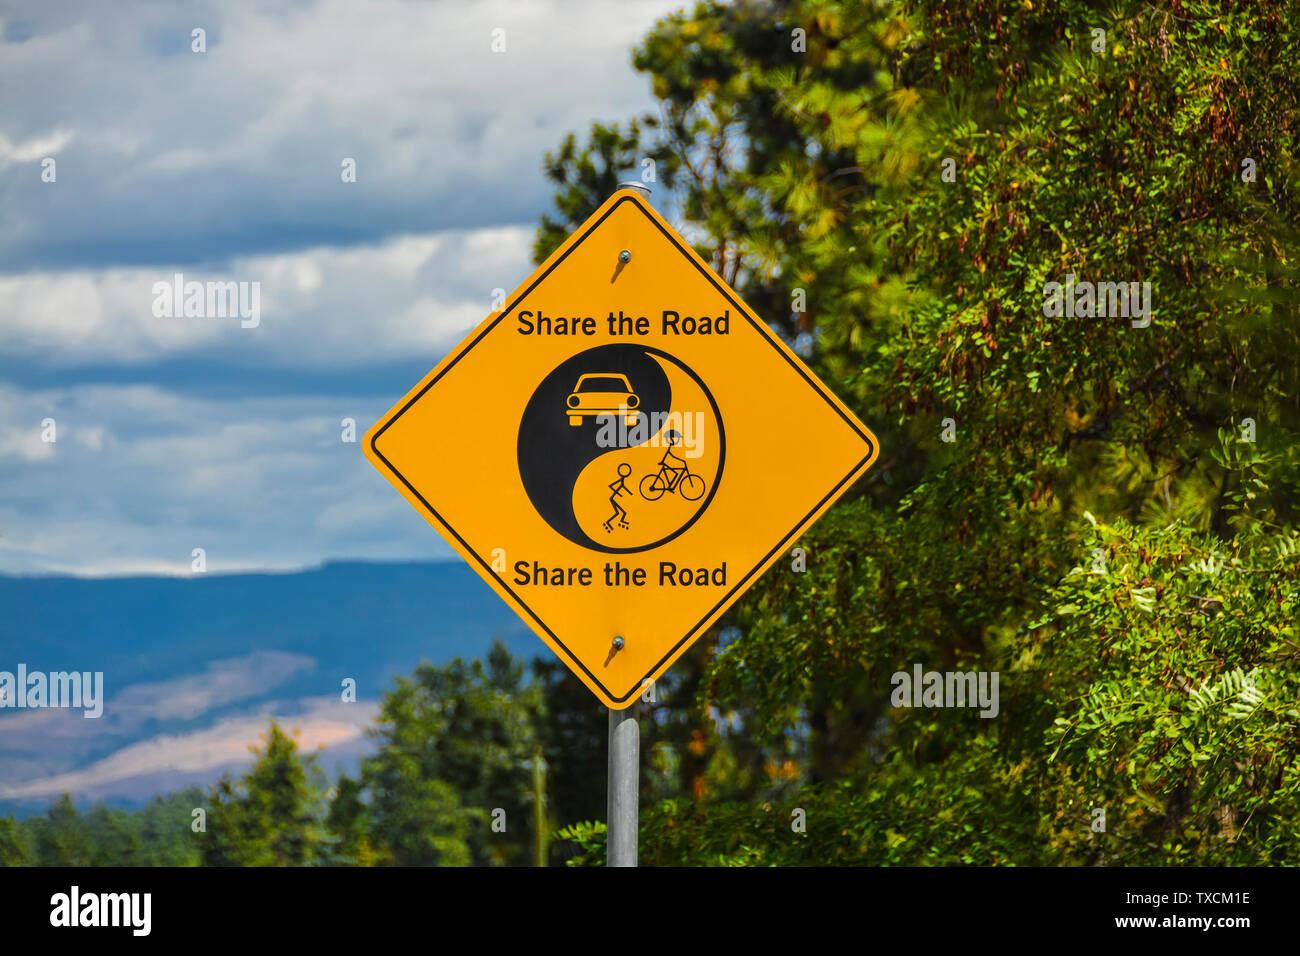 Share the Road yellow sign on green leaves and blue sky background. Stock Photo